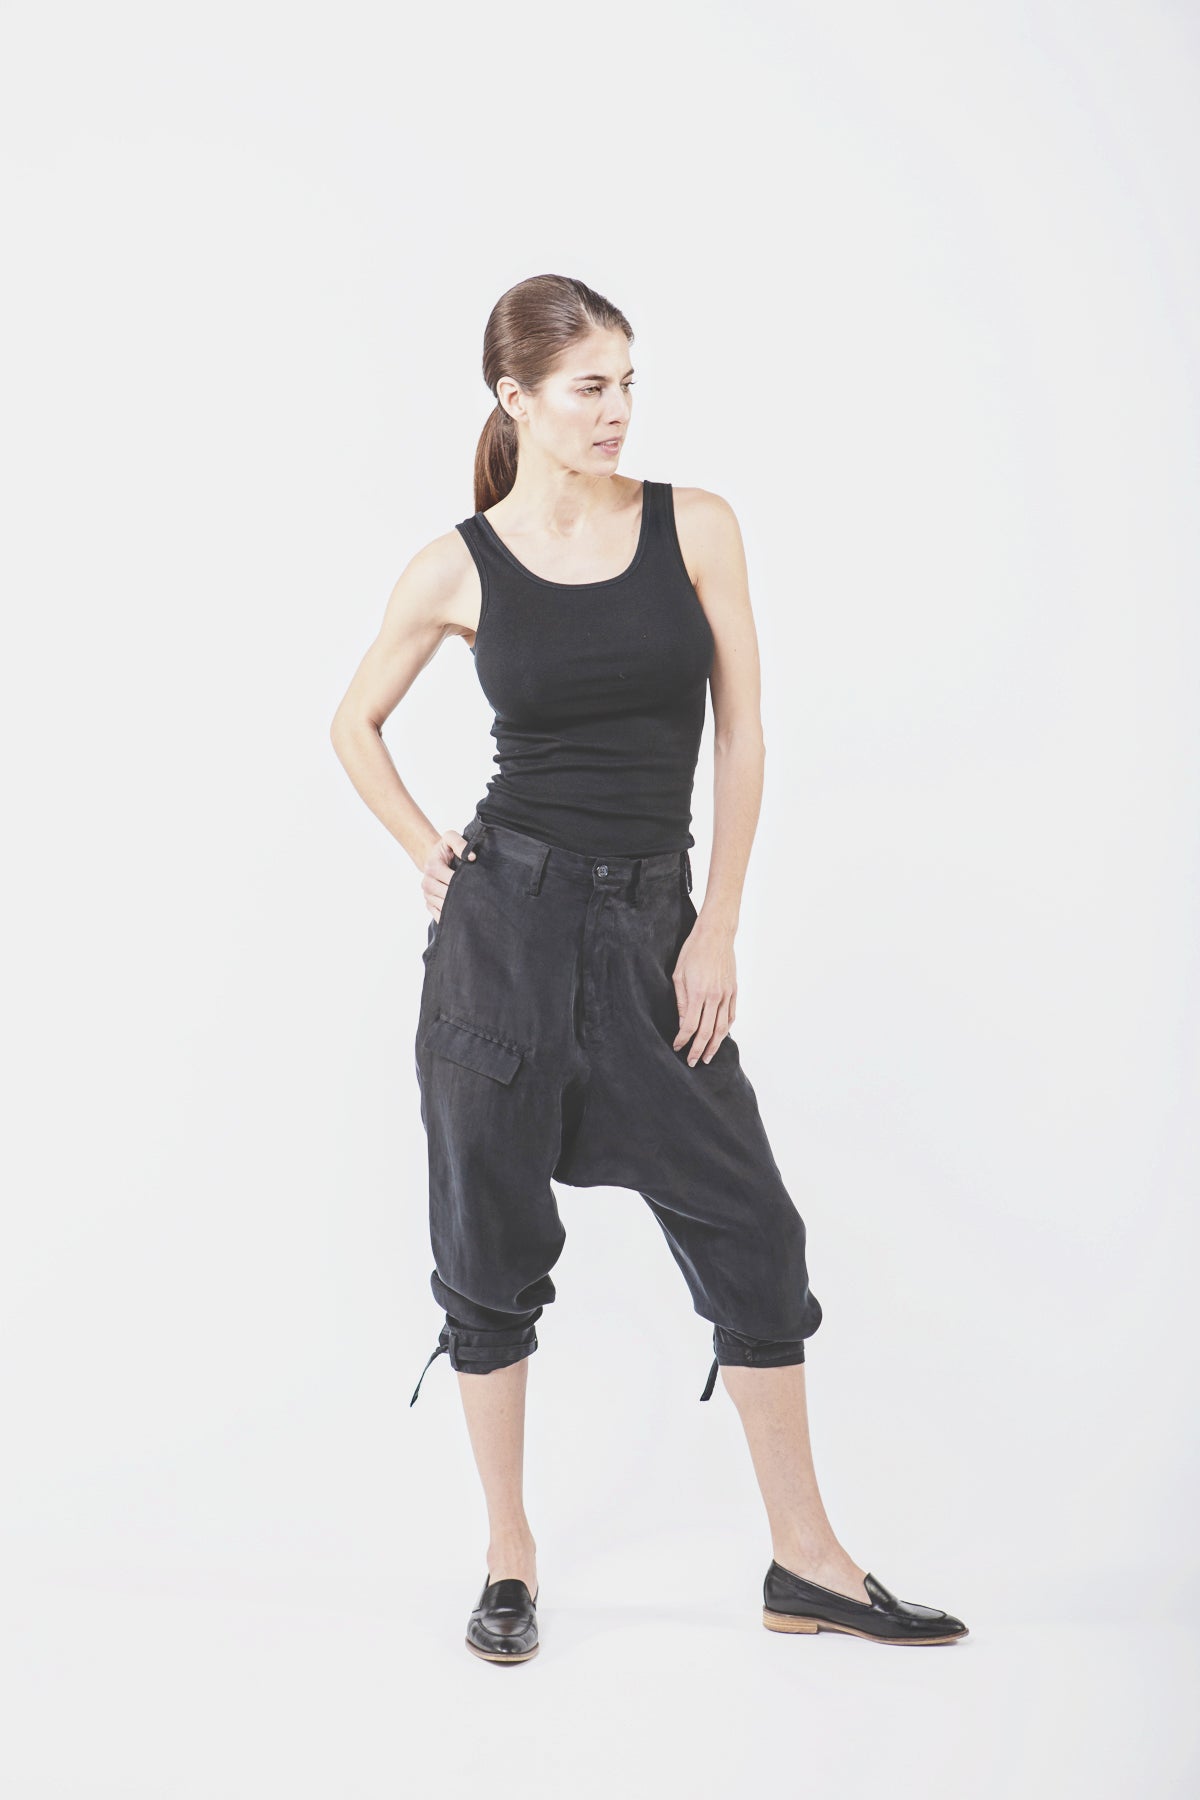 Wolf + Candor - Drop crotch pants in black